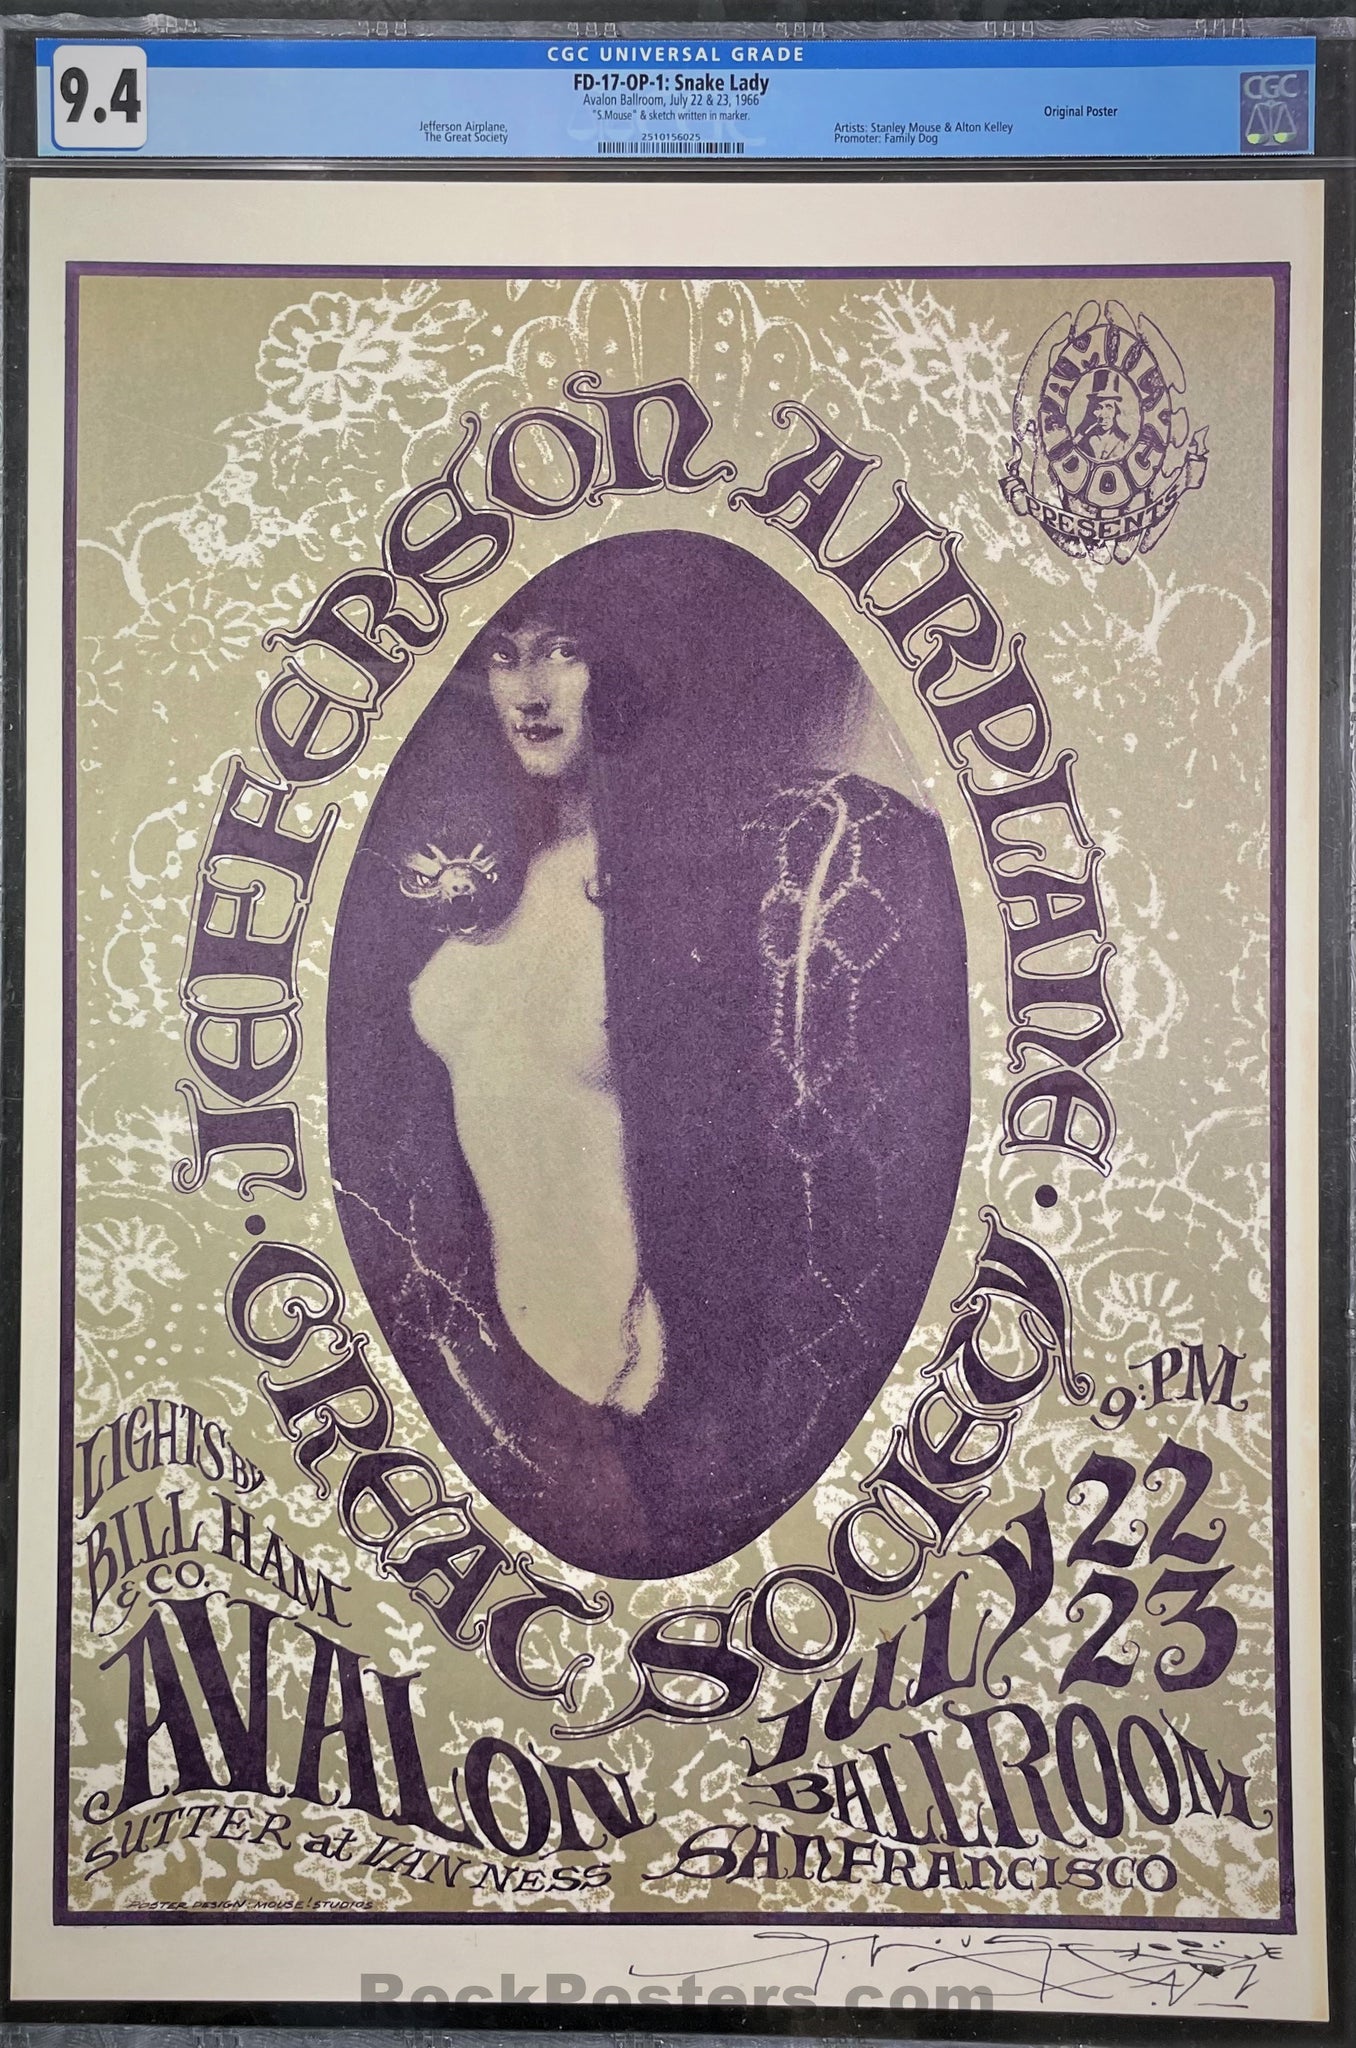 AUCTION - FD-17 - Jefferson Airplane -  Mouse SIGNED - 1966 Poster - Avalon Ballroom - CGC Graded 9.4